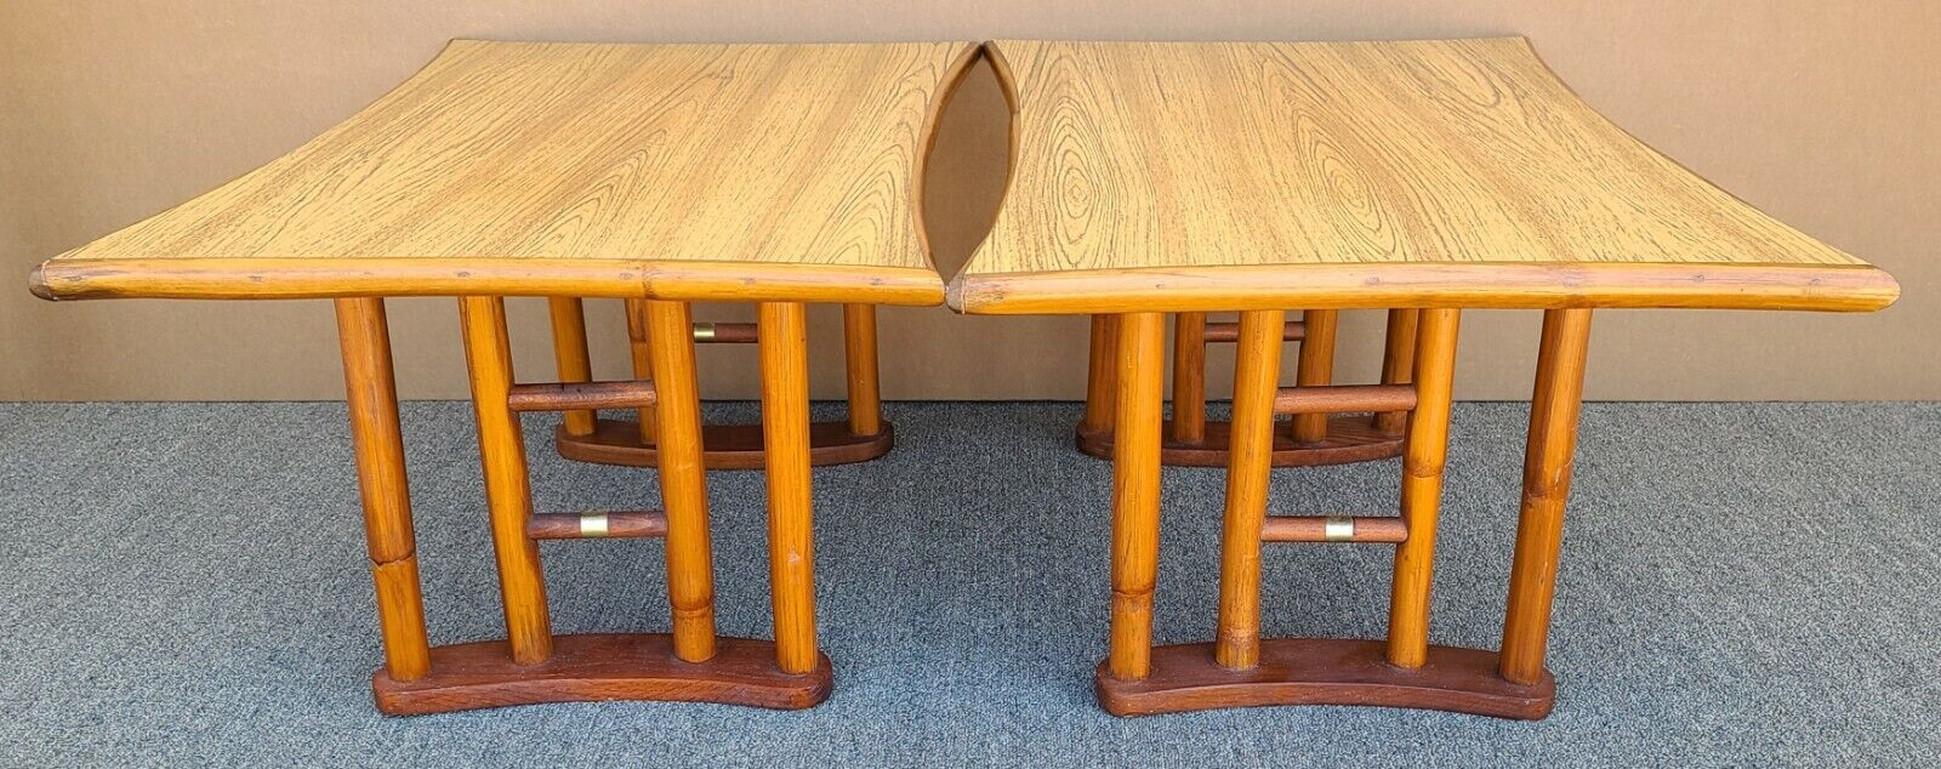 Vintage Bamboo Boho Chic Chinoiserie Side End Tables For Sale 3